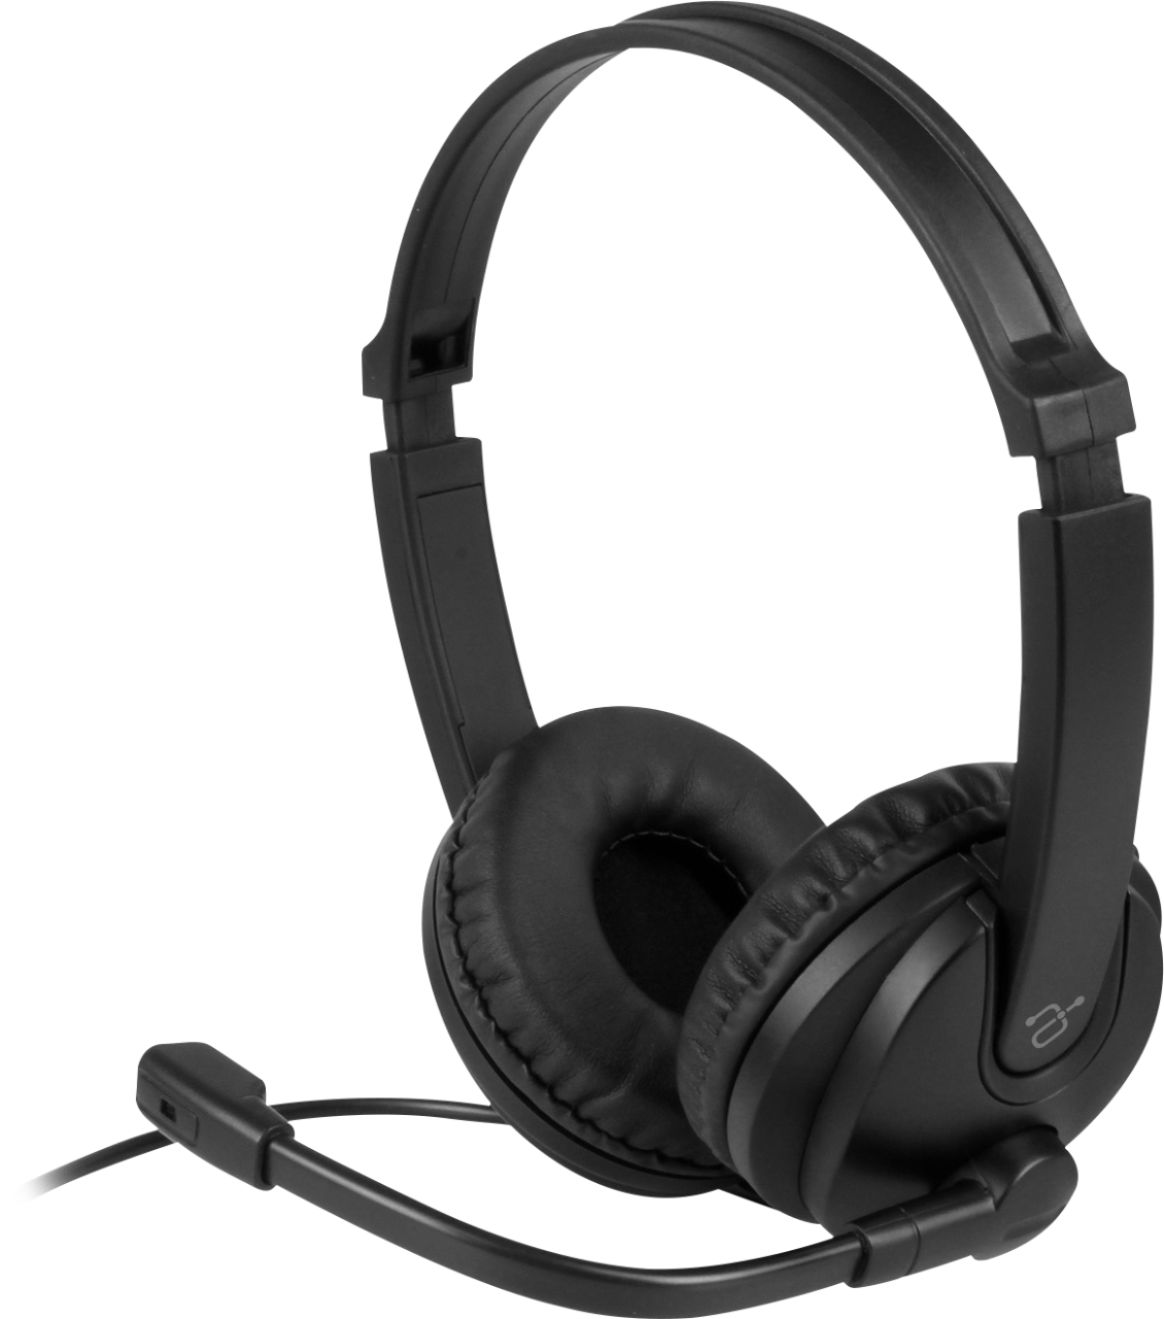 Angle View: Aluratek - Wired 3.5mm Stereo Headset with Boom Mic - Black